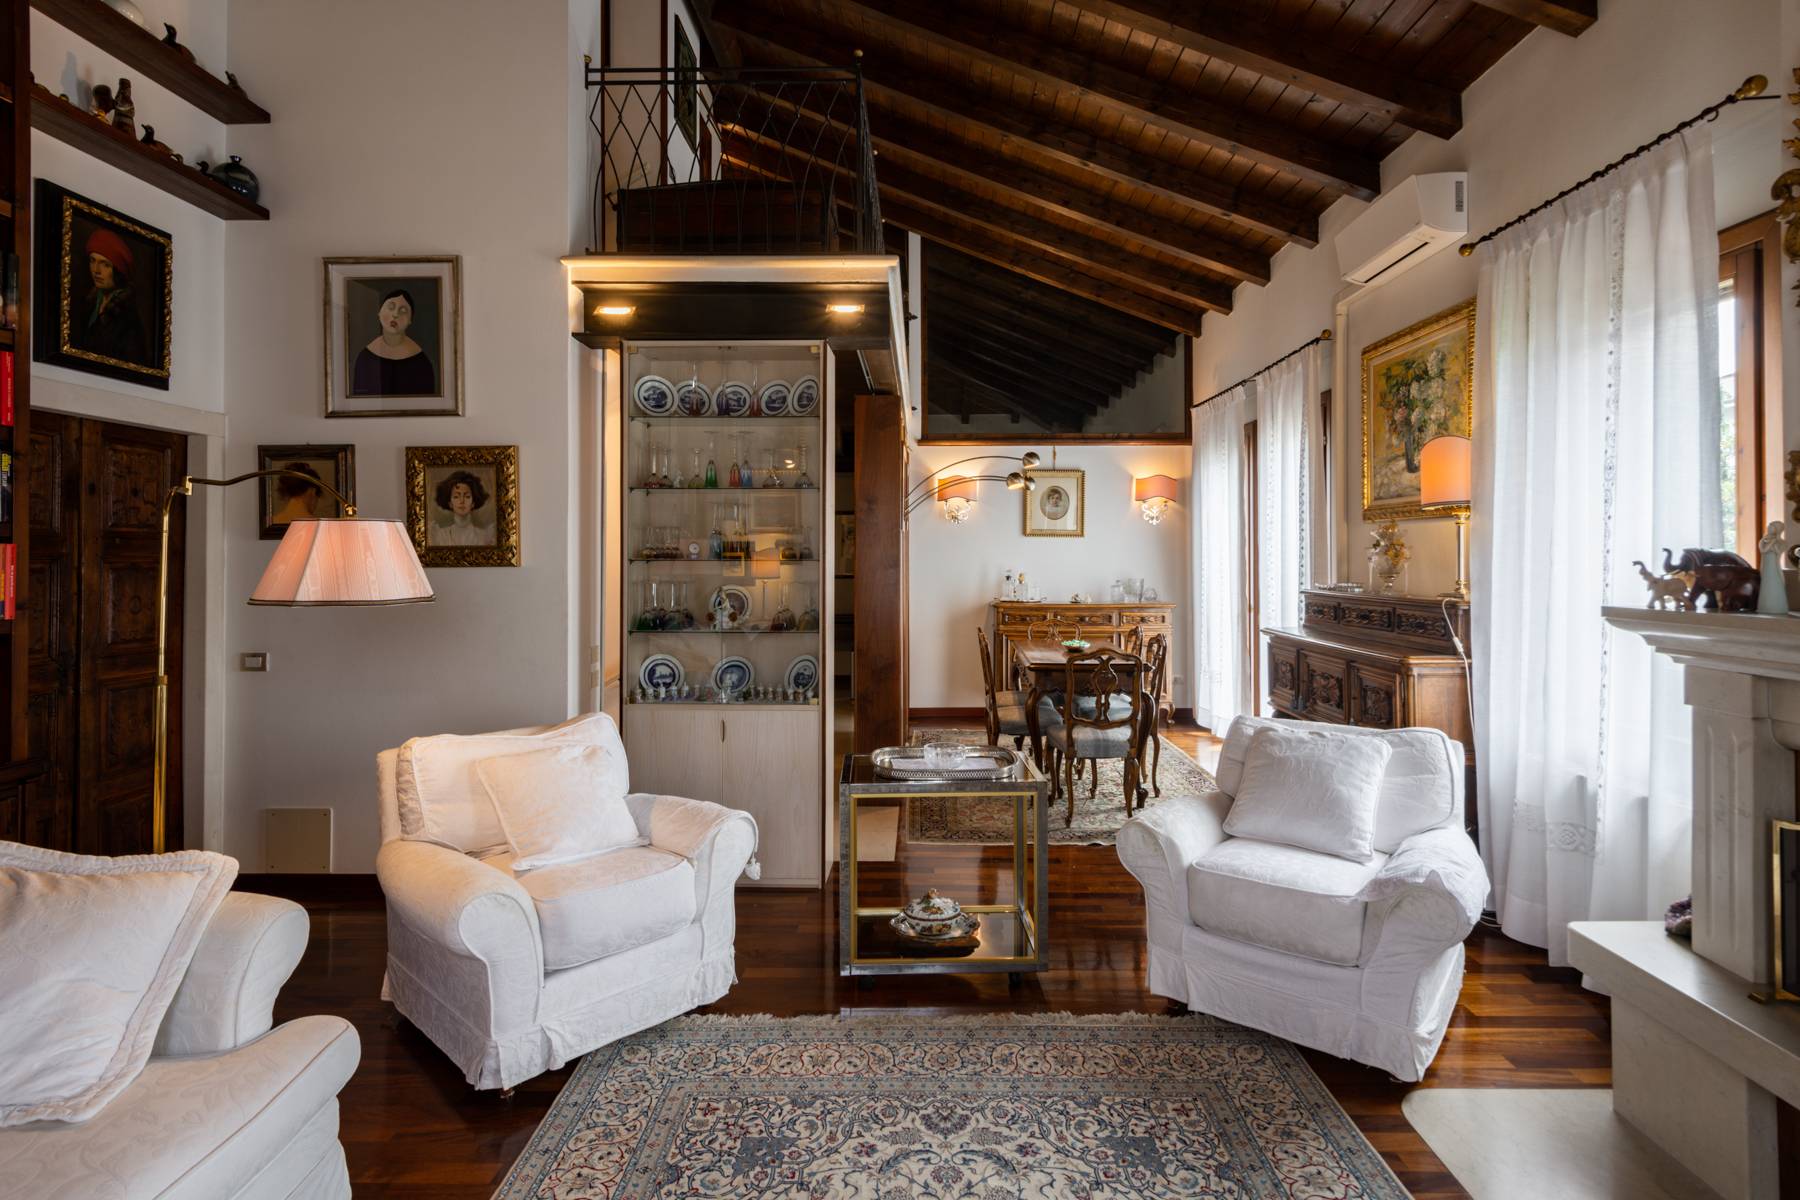 Stunning penthouse in liberty Villa just few minutes from Verona's historic center - 4